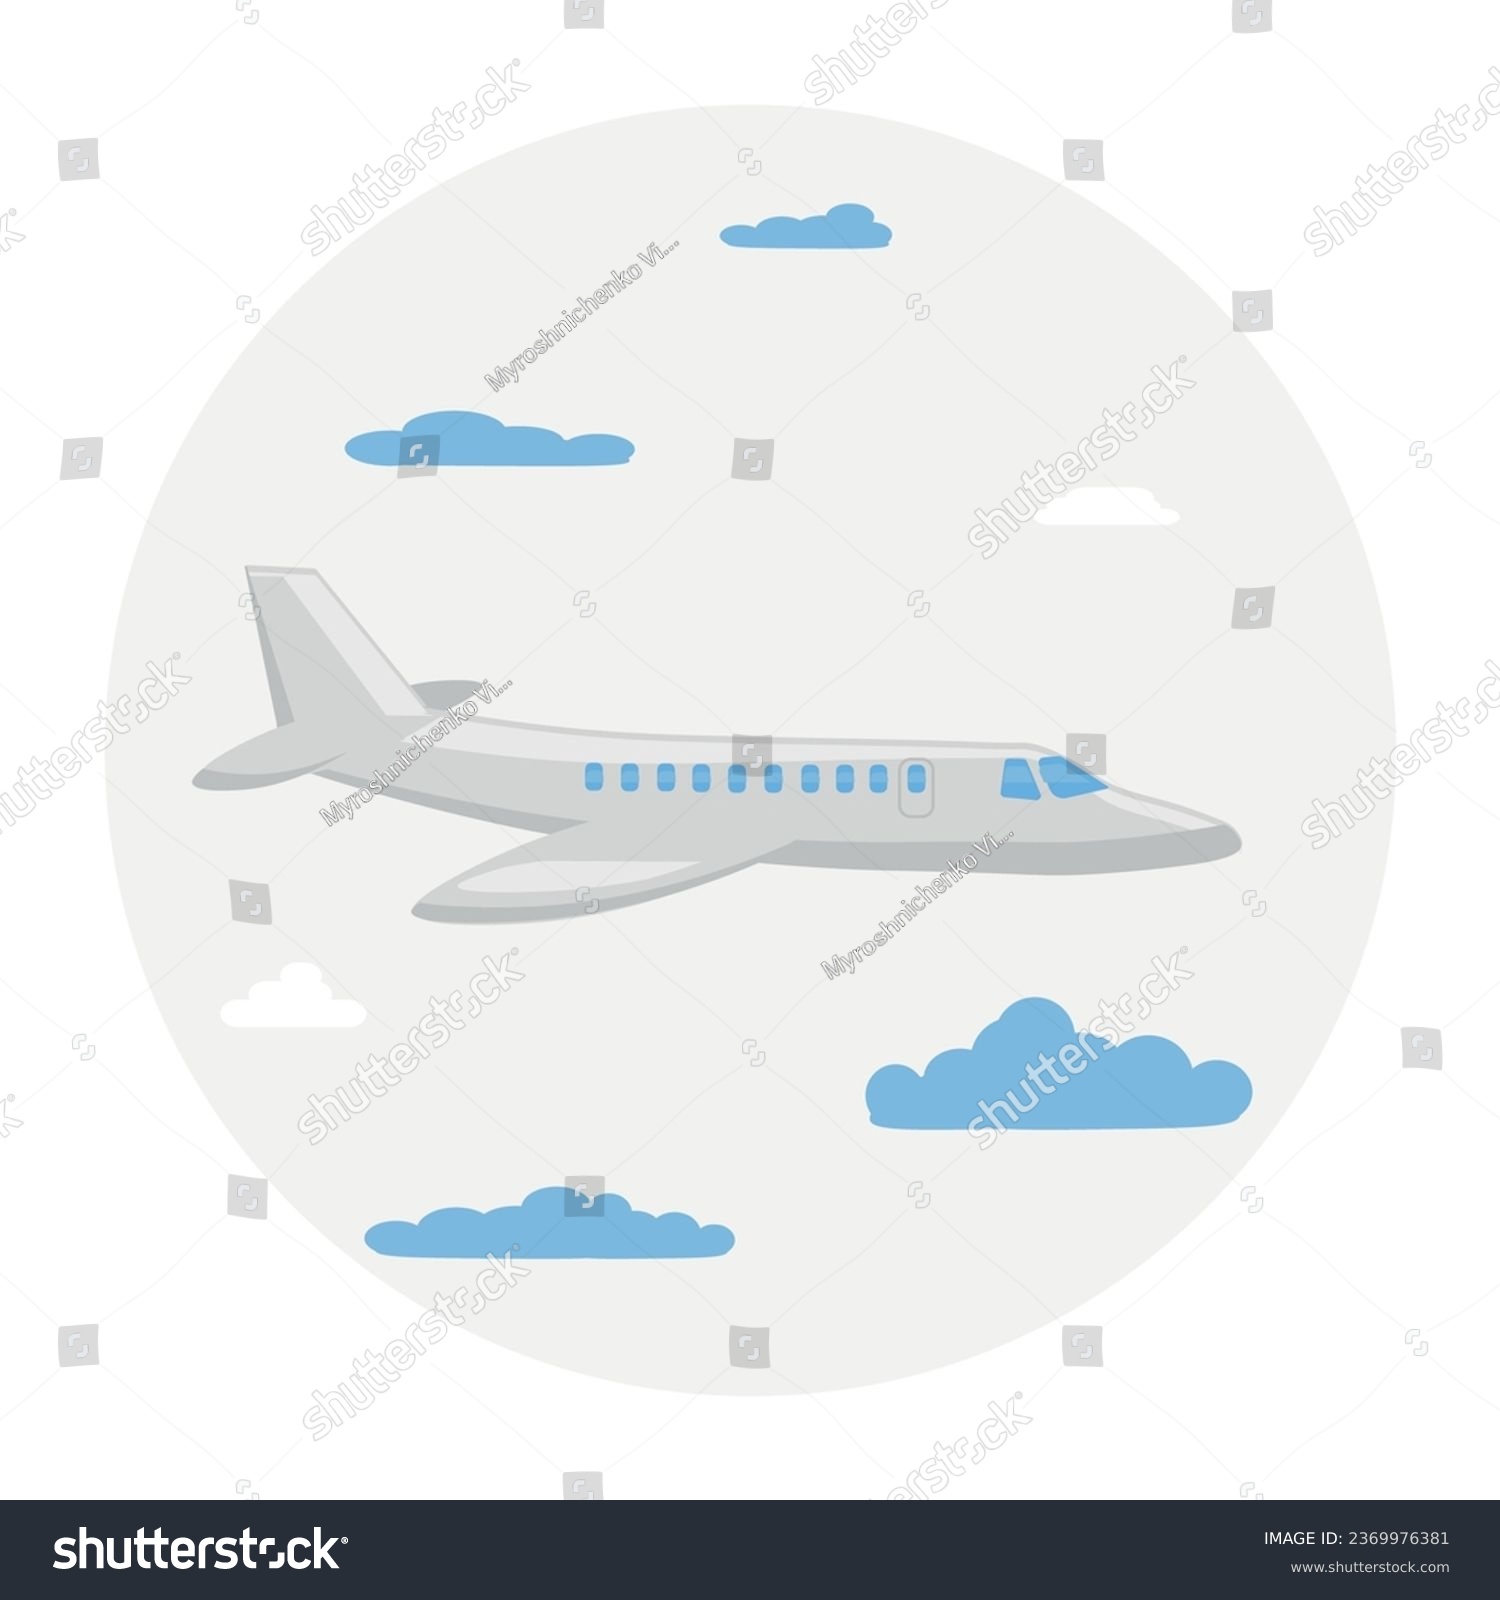 SVG of Vector plane icon. Flat illustration. Suitable for animation, using in web, apps, books, education projects. No transparency, solid colors only. Svg, lottie without bags. svg